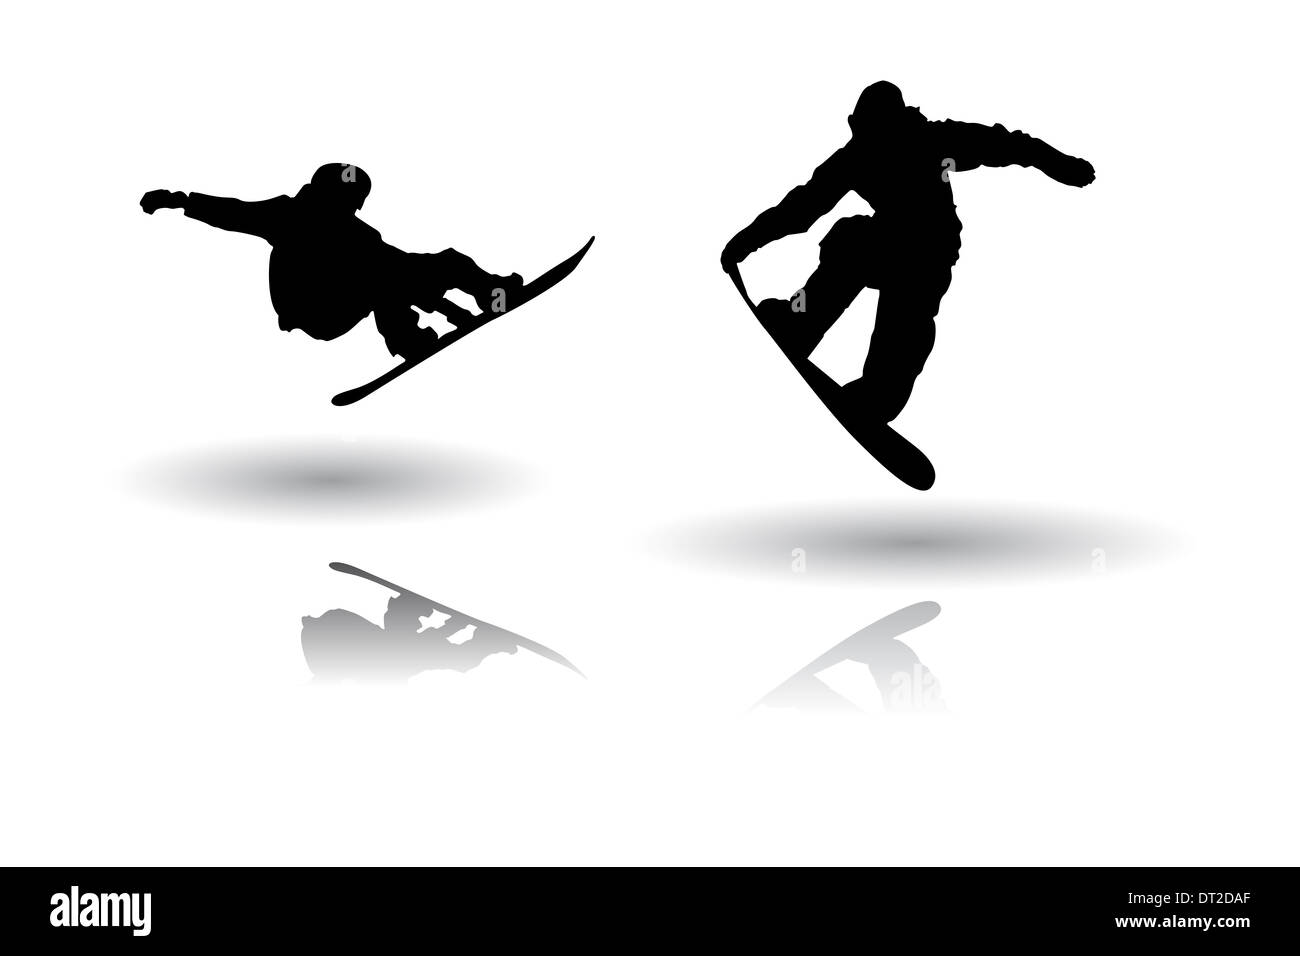 Vector of some Snowboarding silhouettes Stock Photo